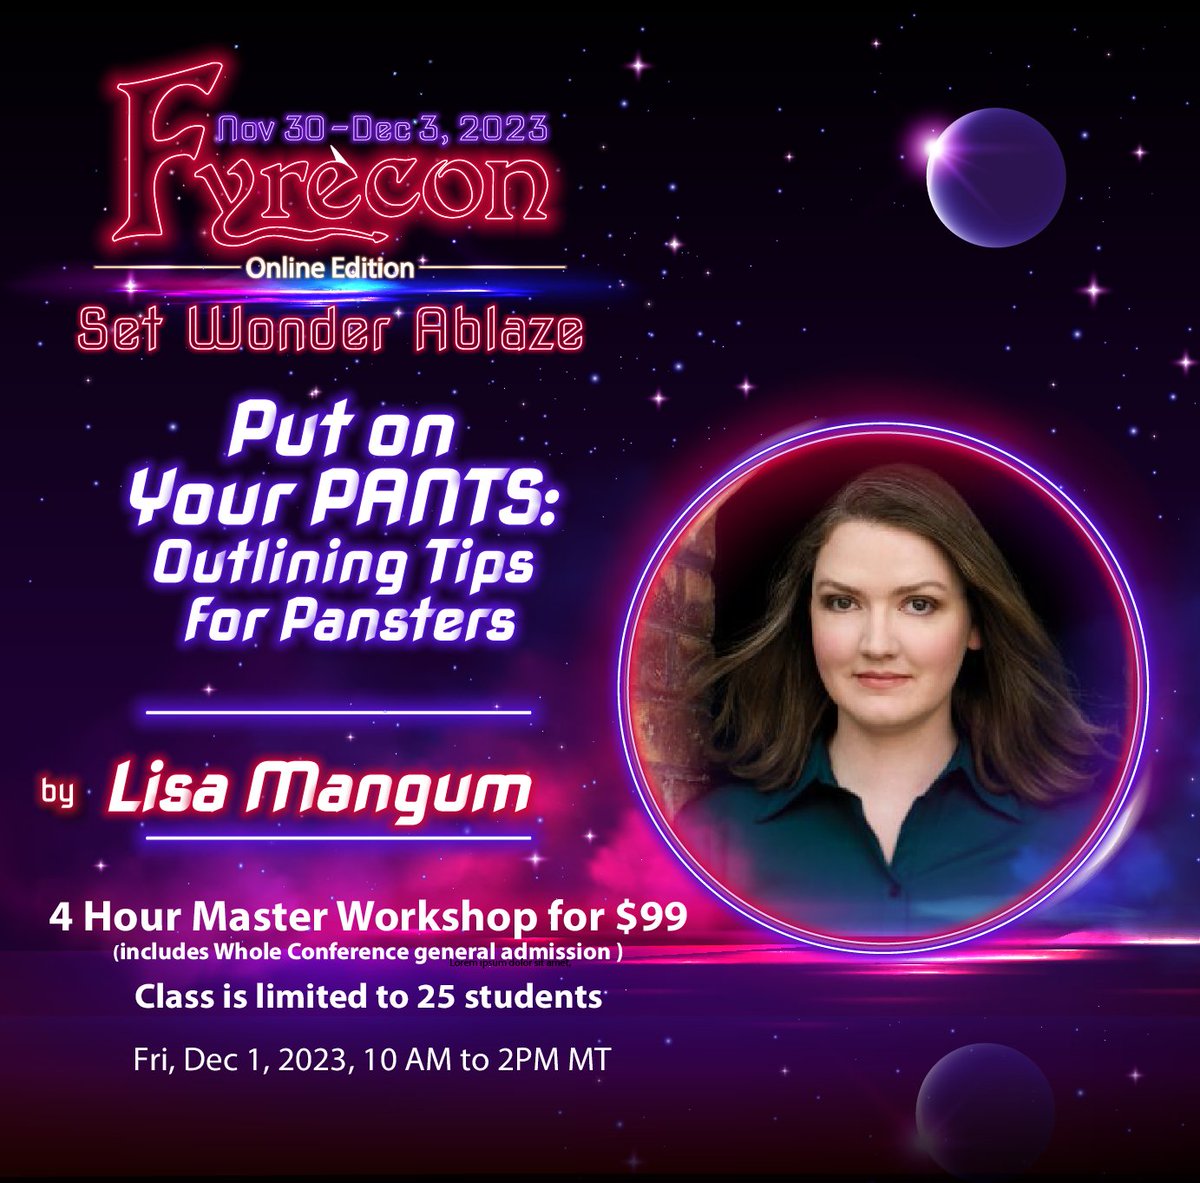 We are happy to welcome back @LisaMangum for Fyrecon 7 as a Master Guest! Sign up for her Master workshop at fyrecon.com/registration/ #WritingCommmunity #Editor